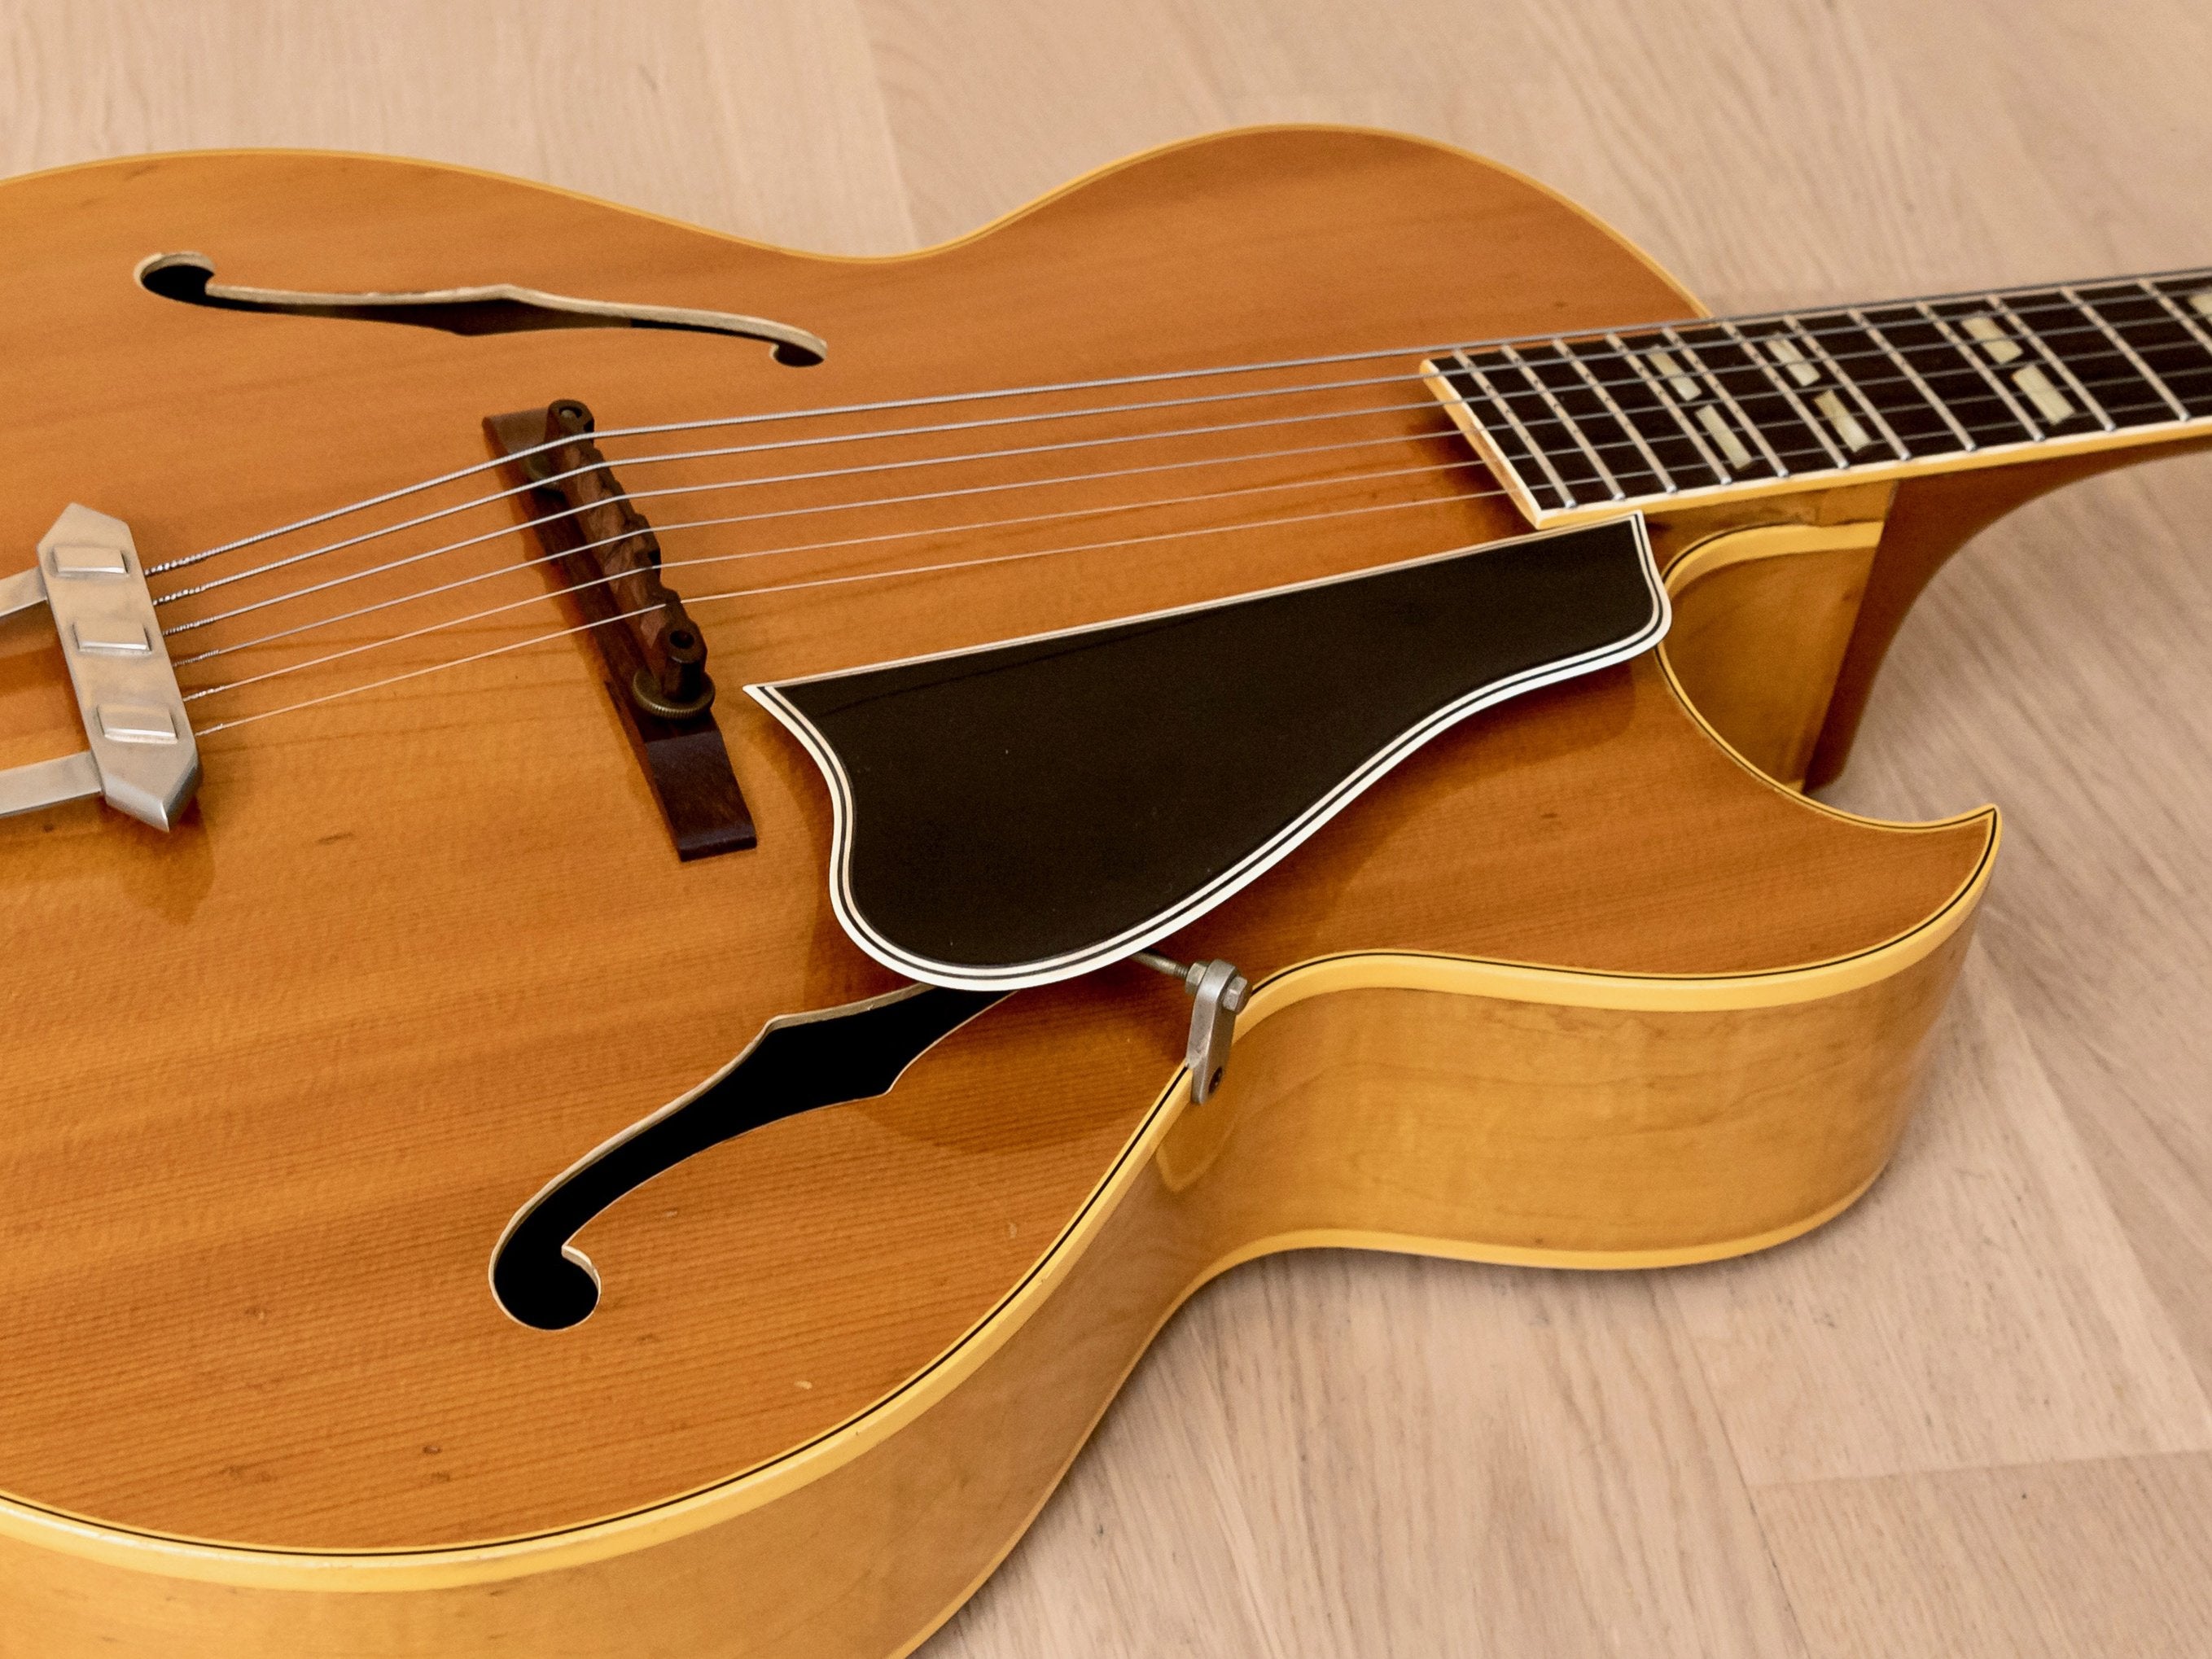 1960 Gibson L-4C Carved Top Cutaway Vintage Archtop Acoustic Guitar Blonde w/ Case, Hangtag